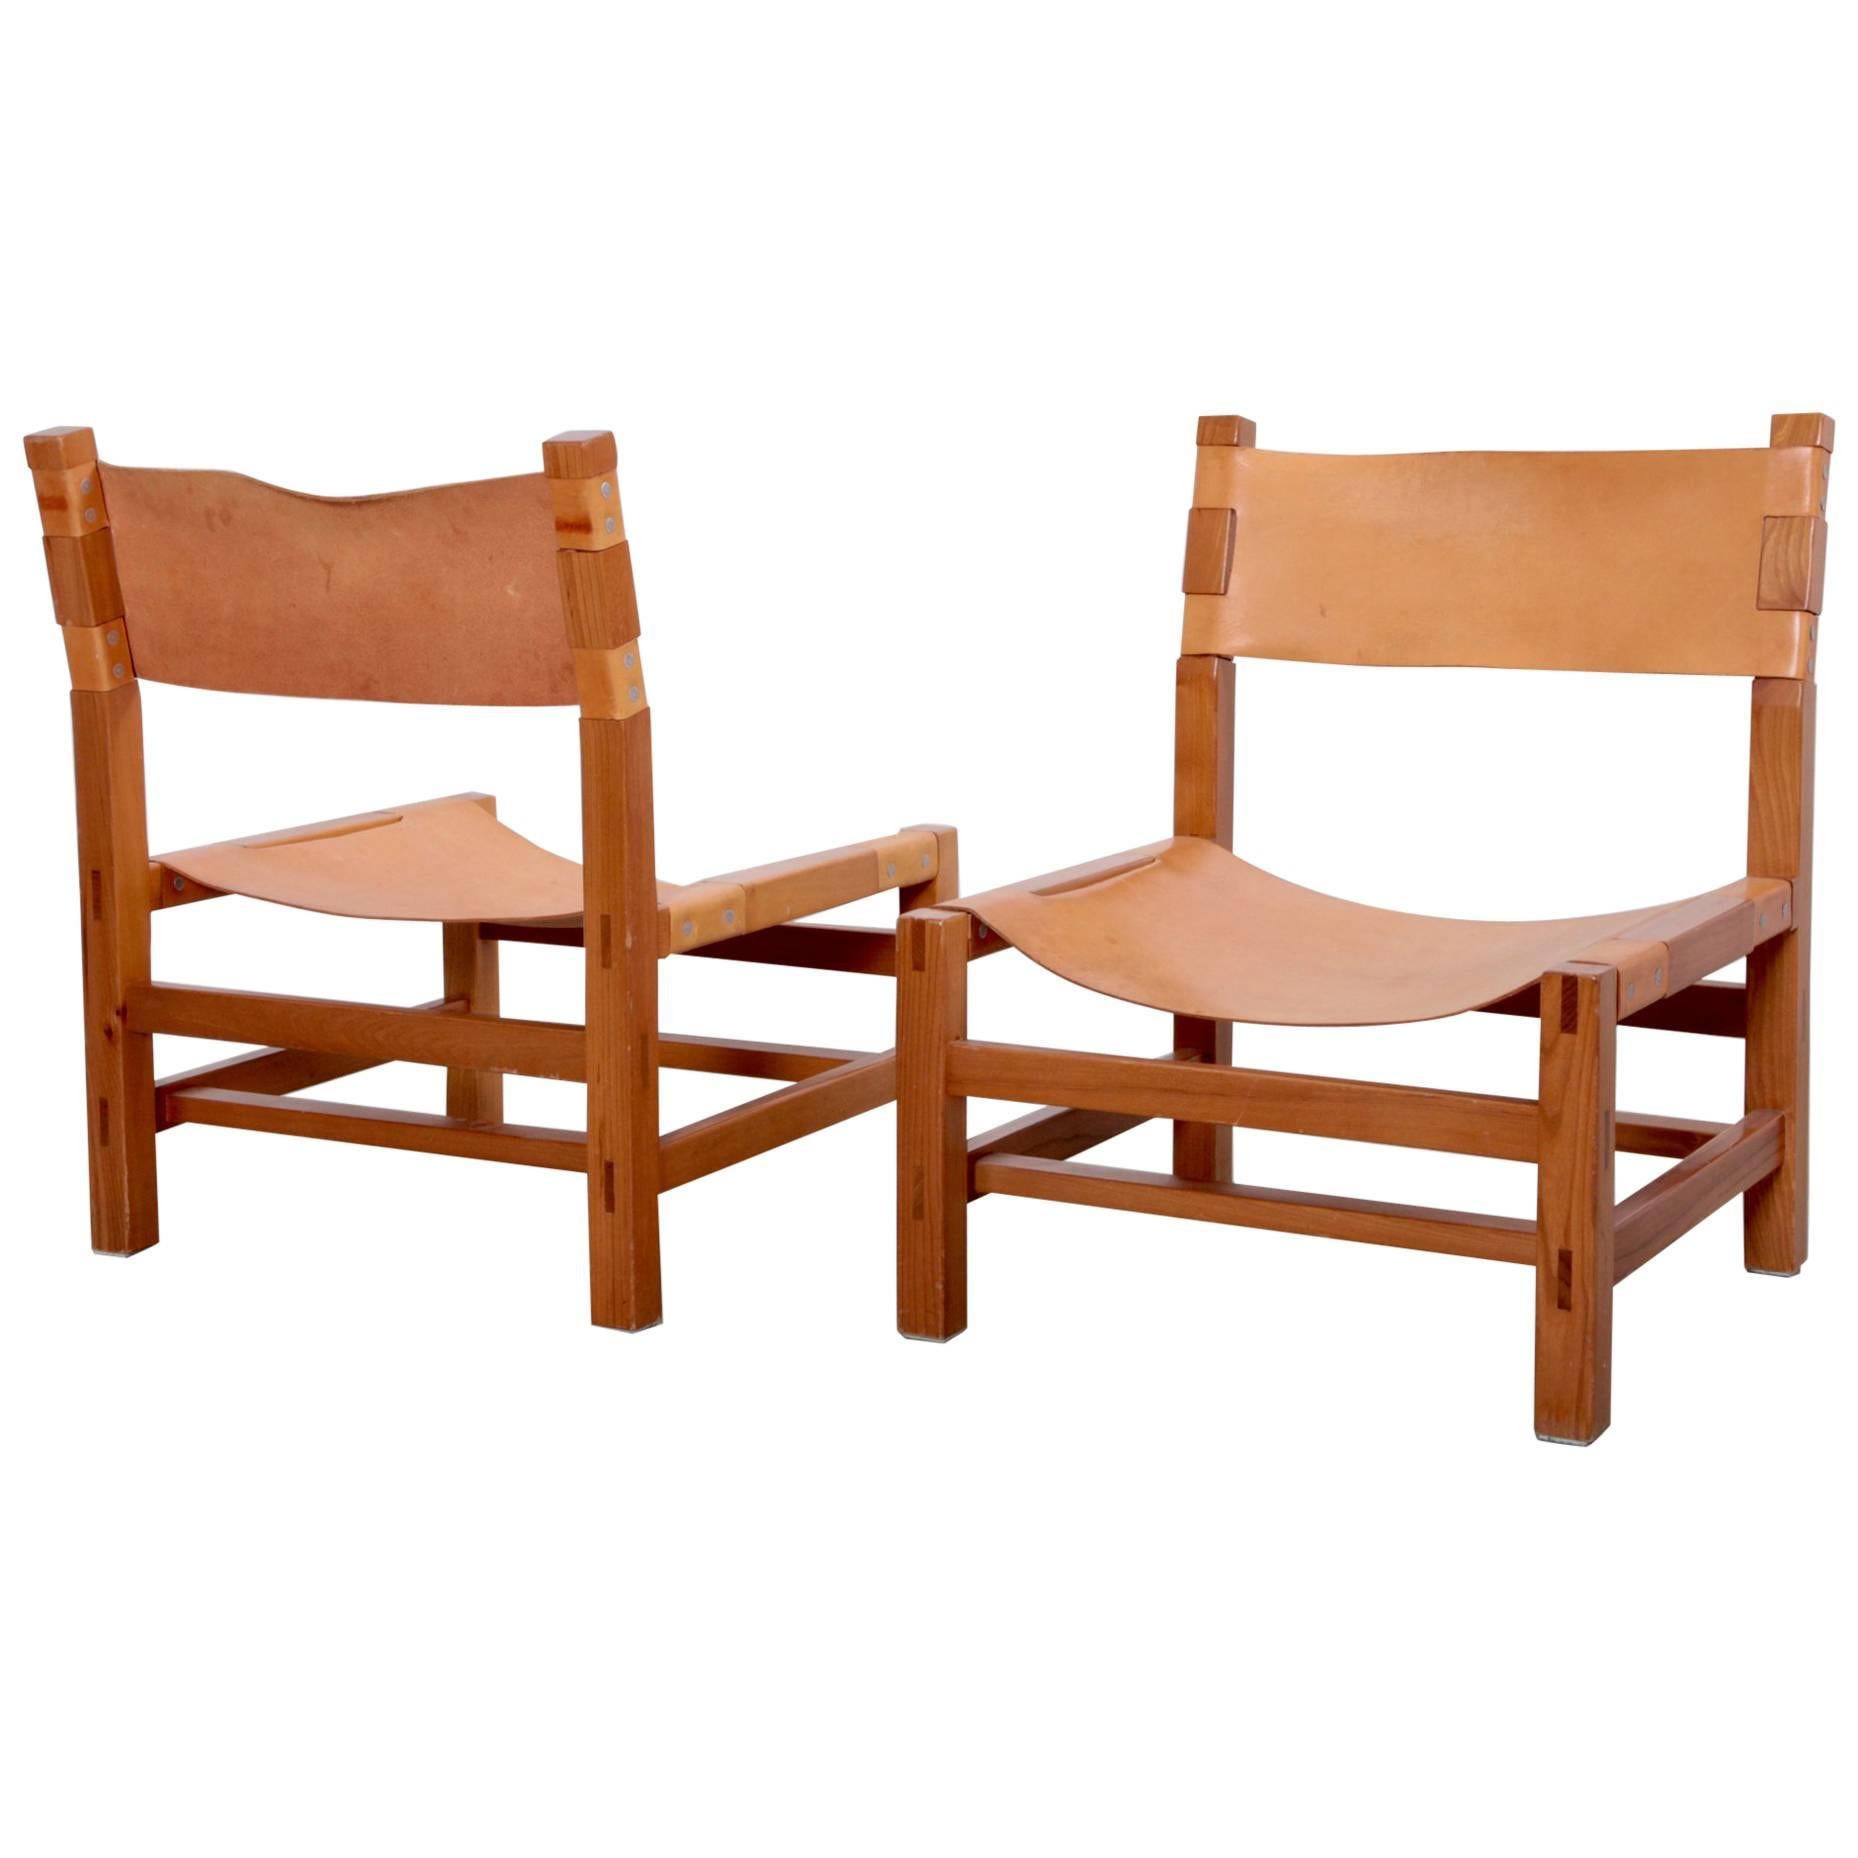 Pair of Signed Maison Regain Lounge Chairs in Original Condition, France, 1970s